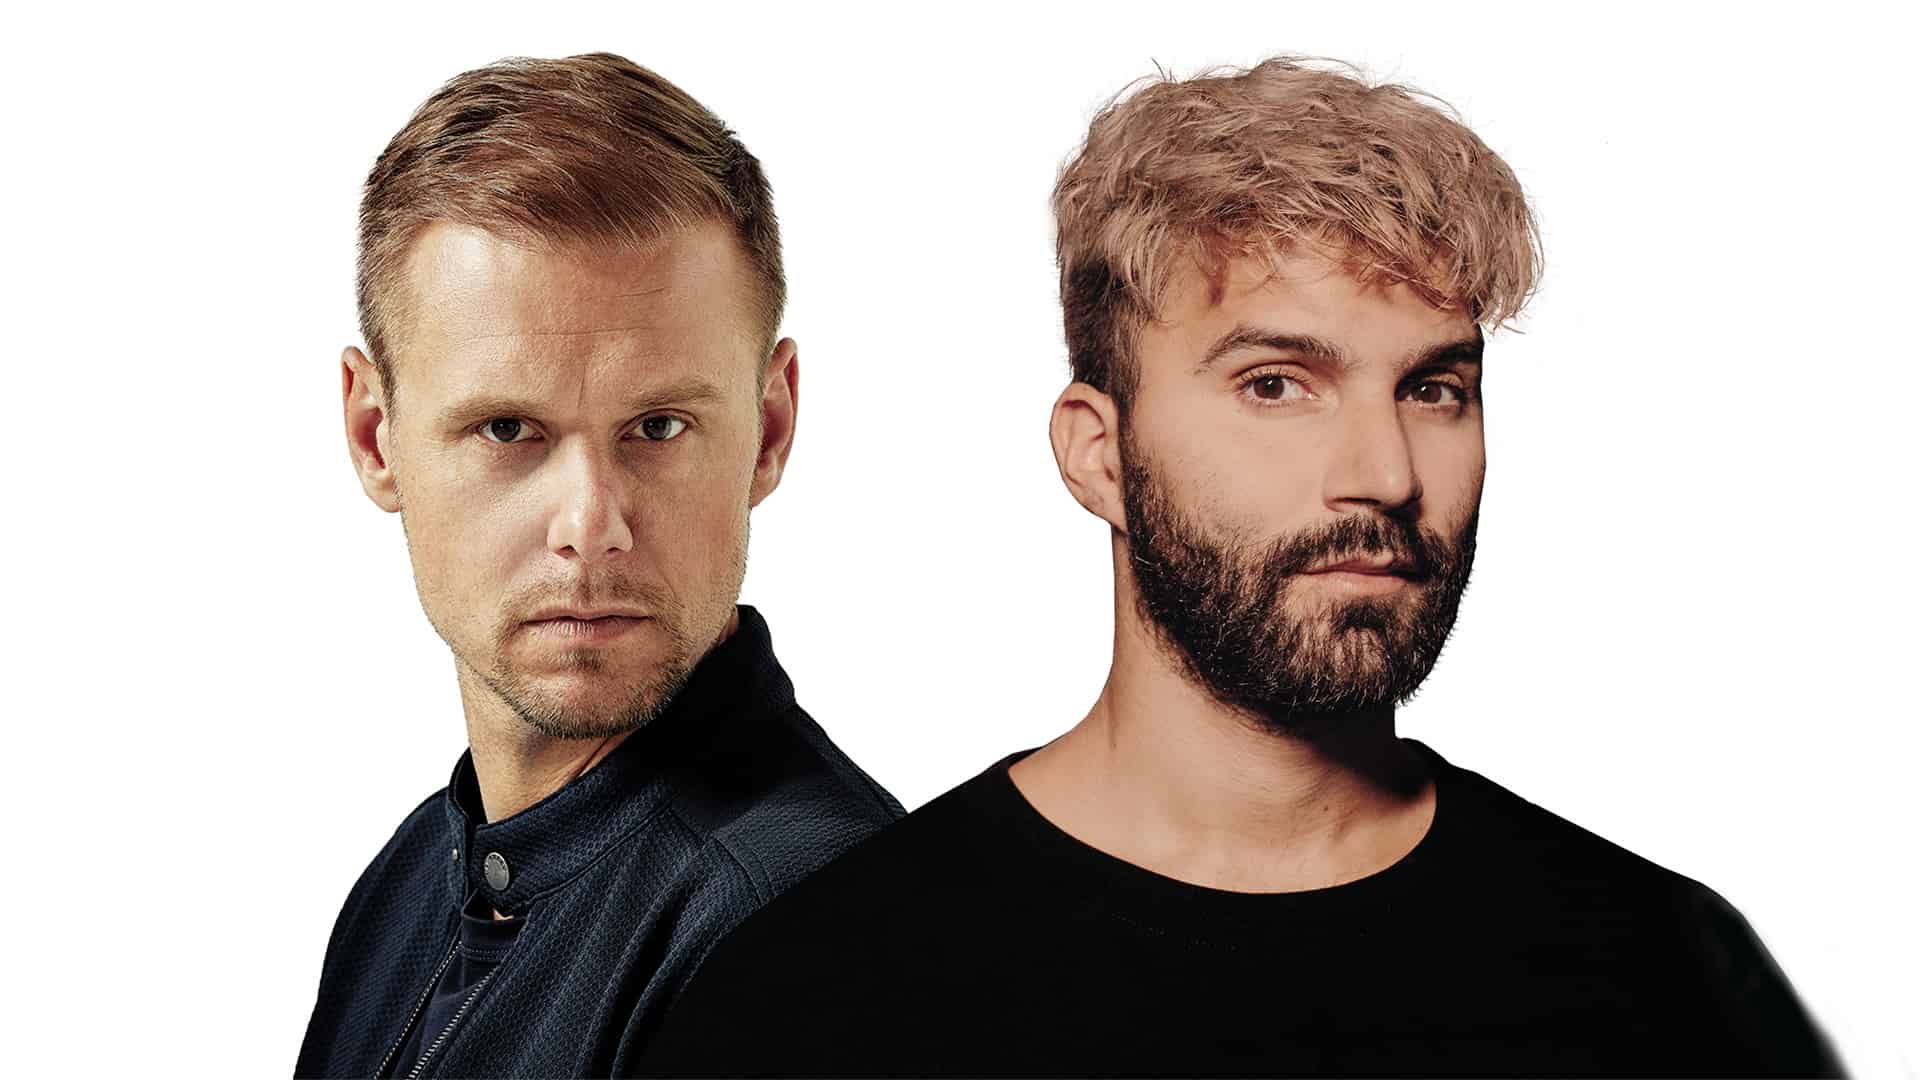 Armin van Buuren & R3HAB collaborate for the first time to release the anthemic single ‘Love We Lost’: Listen